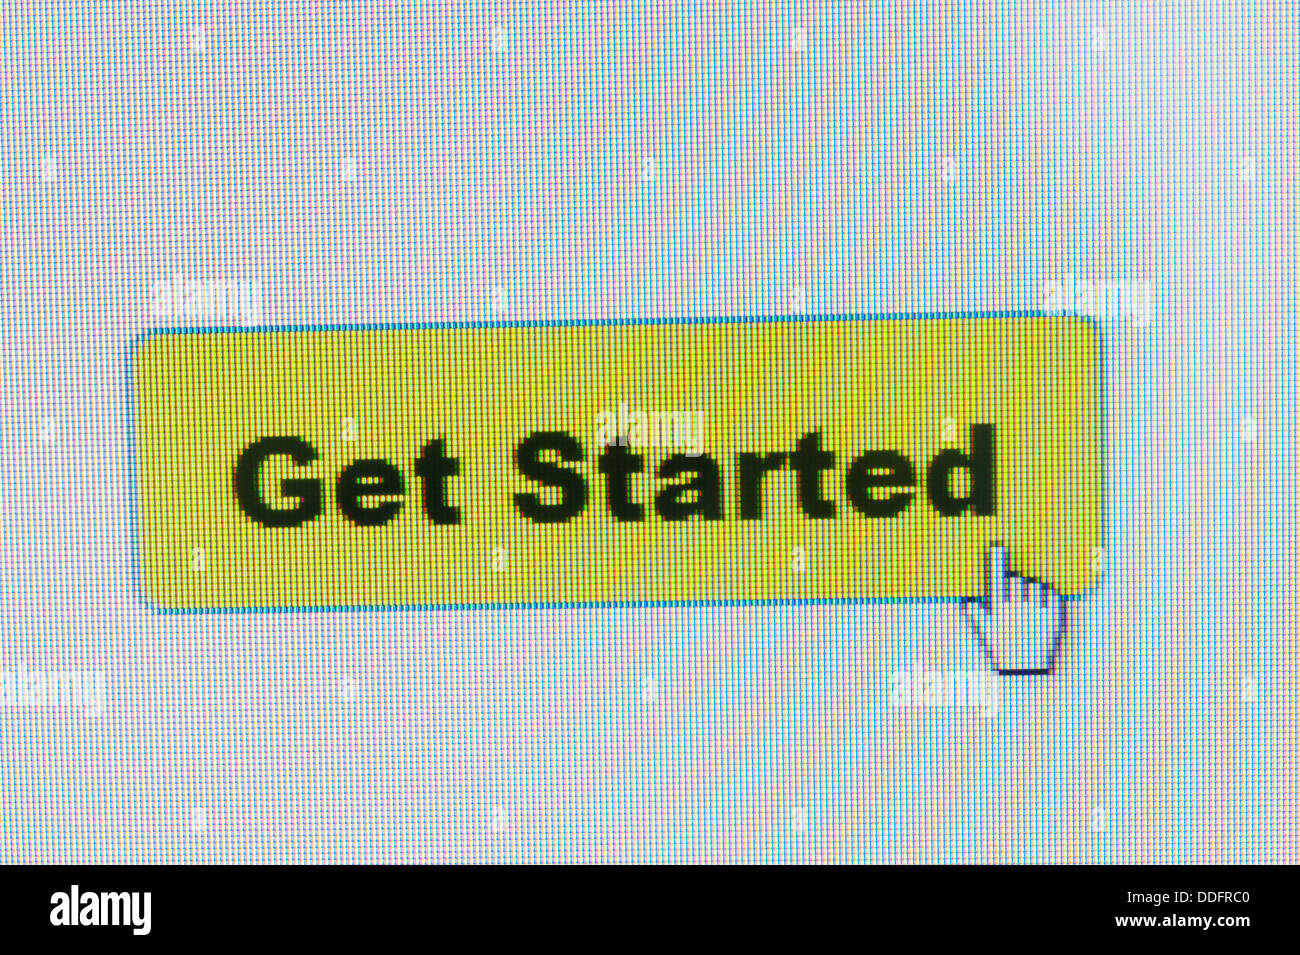 Get started button and mouse cursor on computer screen Stock Photo